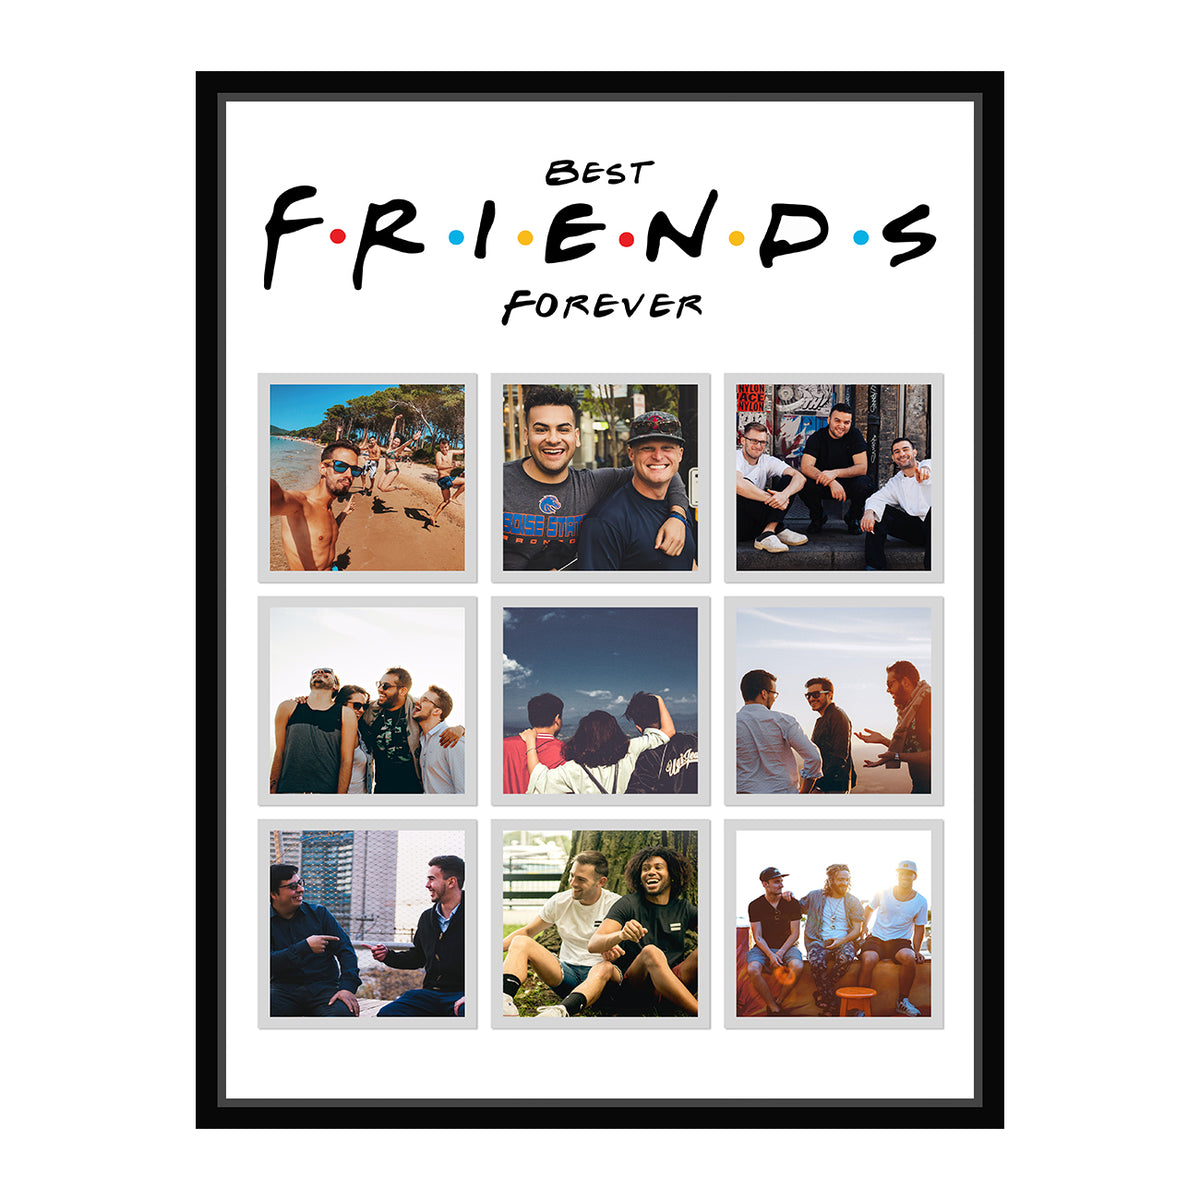 Amazing Gifts for Best Friend | Buy Best Friend Gifts Online at Fabunora